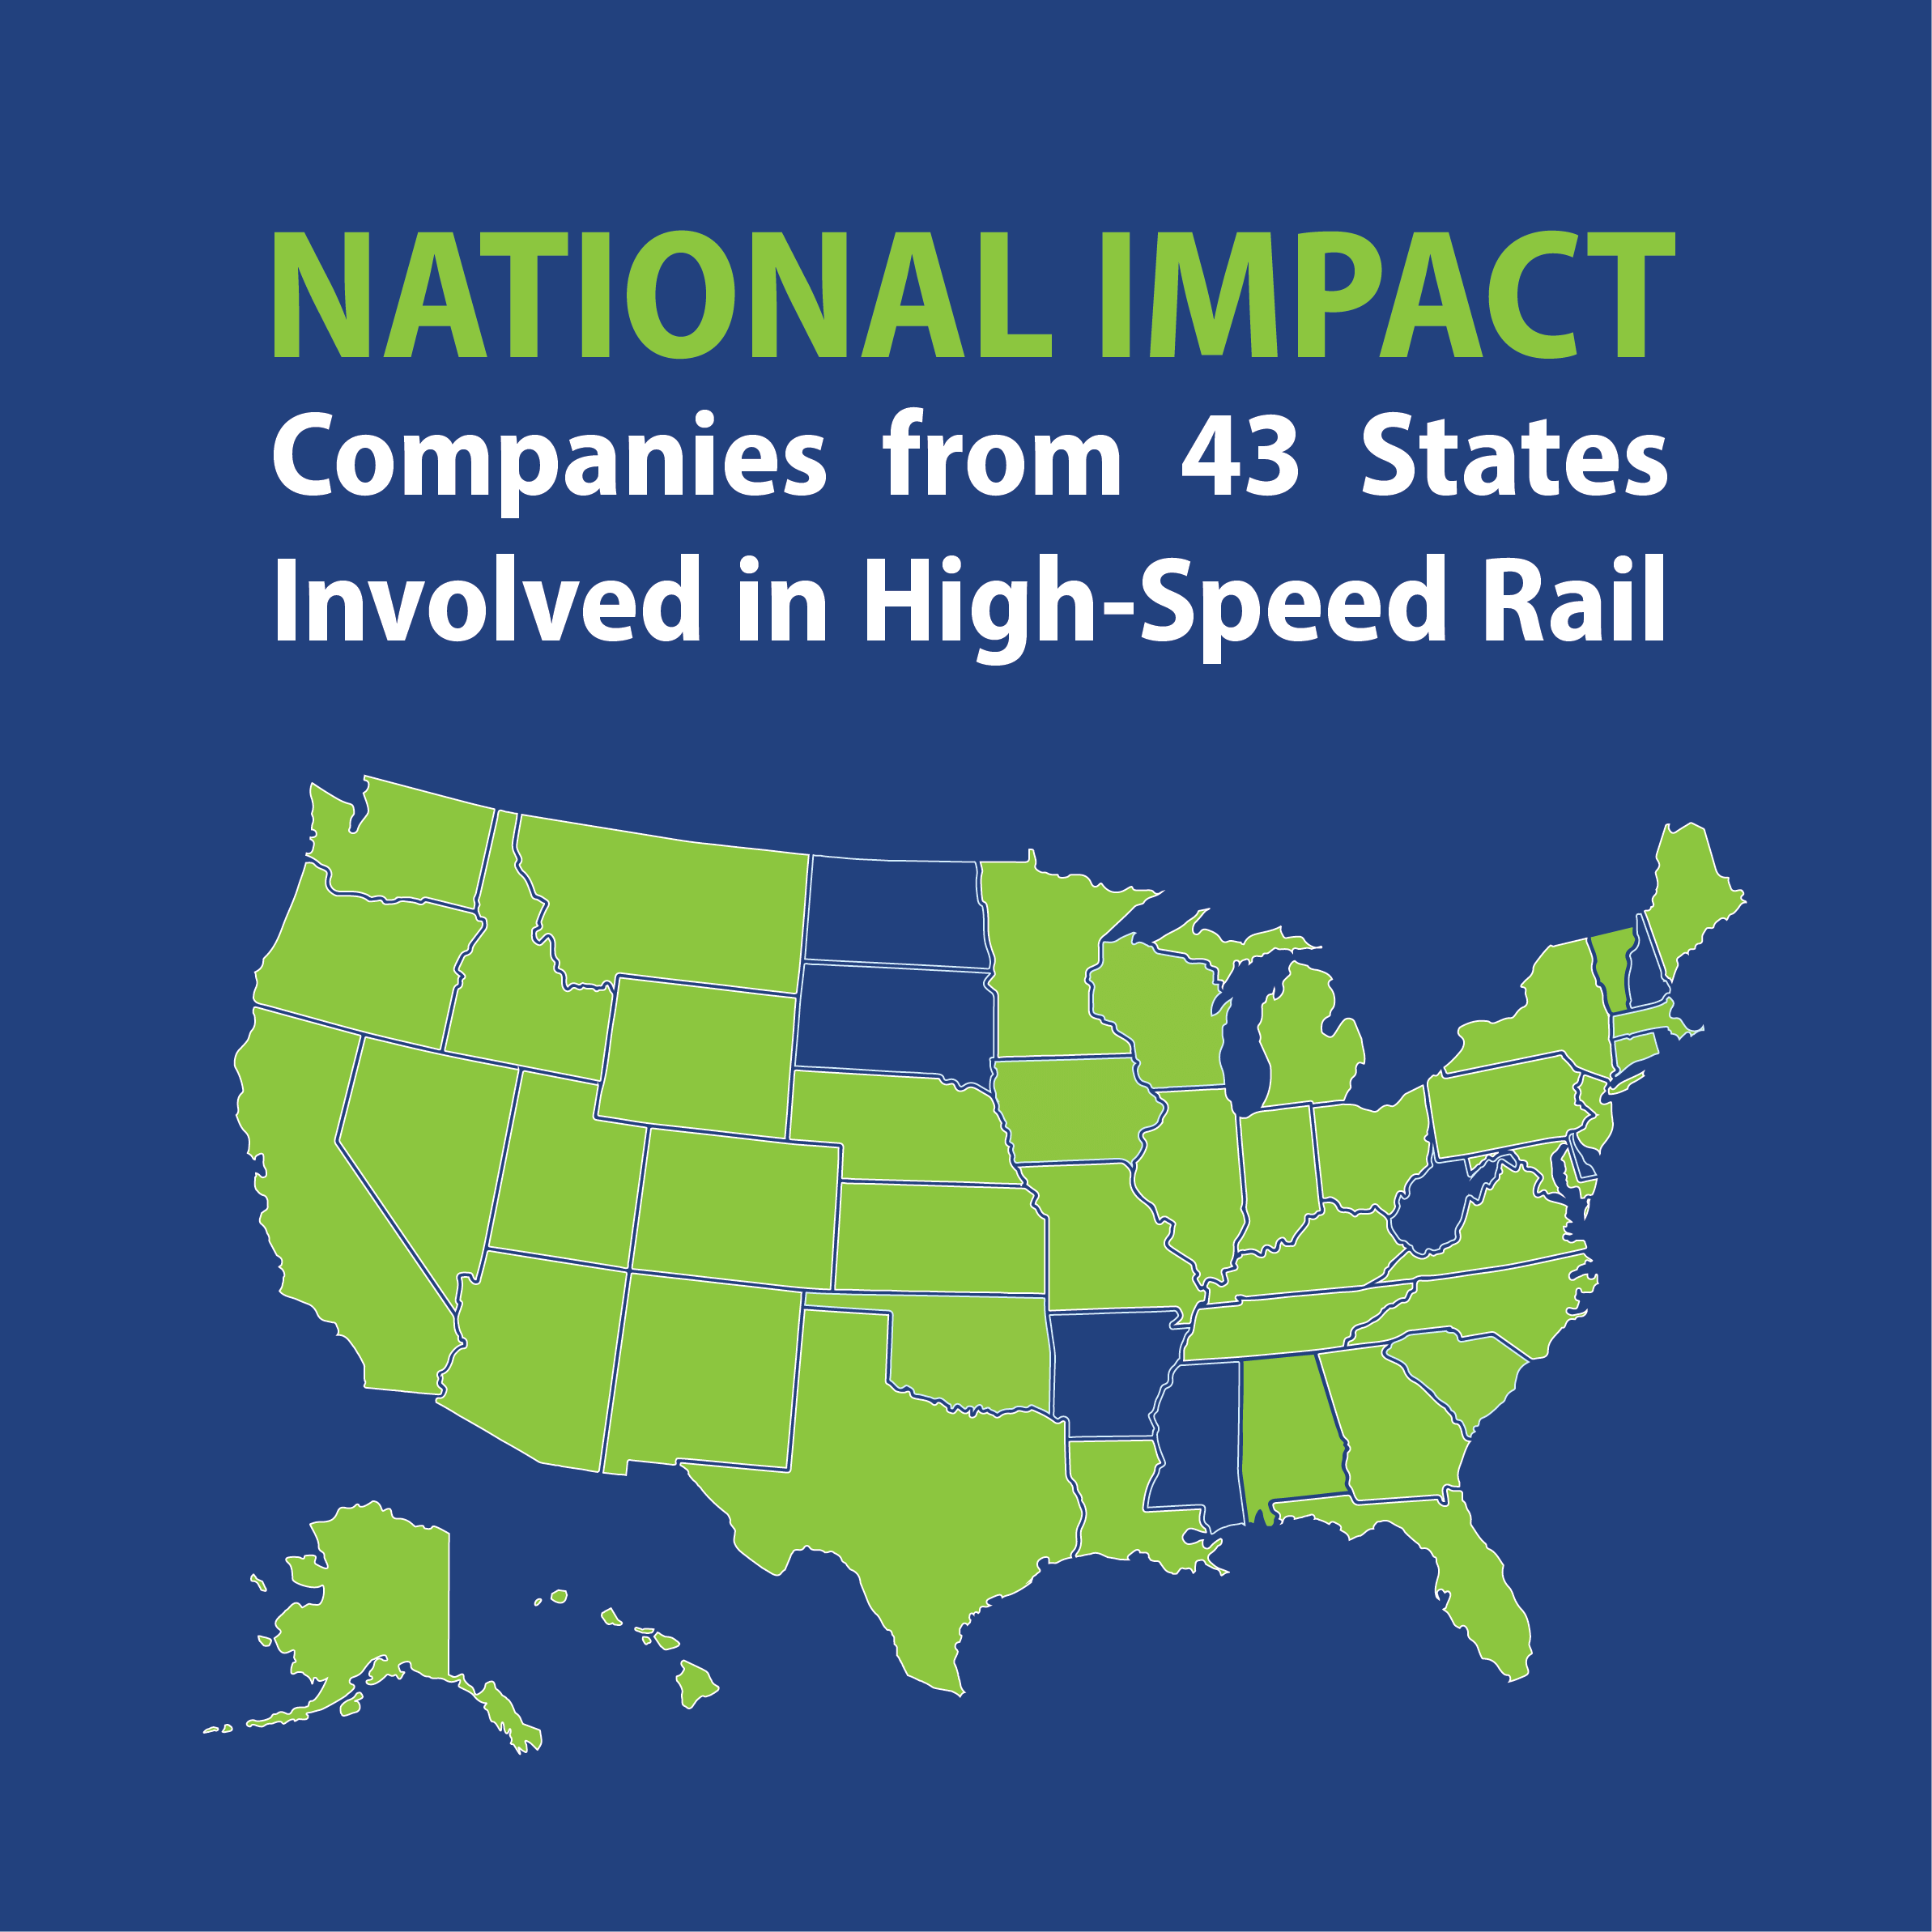 Map of the United States with states in green and blue. North Dakota, South Dakota, Arkansas, Mississippi, West Virginia, New Hampshire, and Rhode Island are colored in blue. The rest of the country is in green. The text reads "National impact companies from 43 states involved in High-Speed Rail."